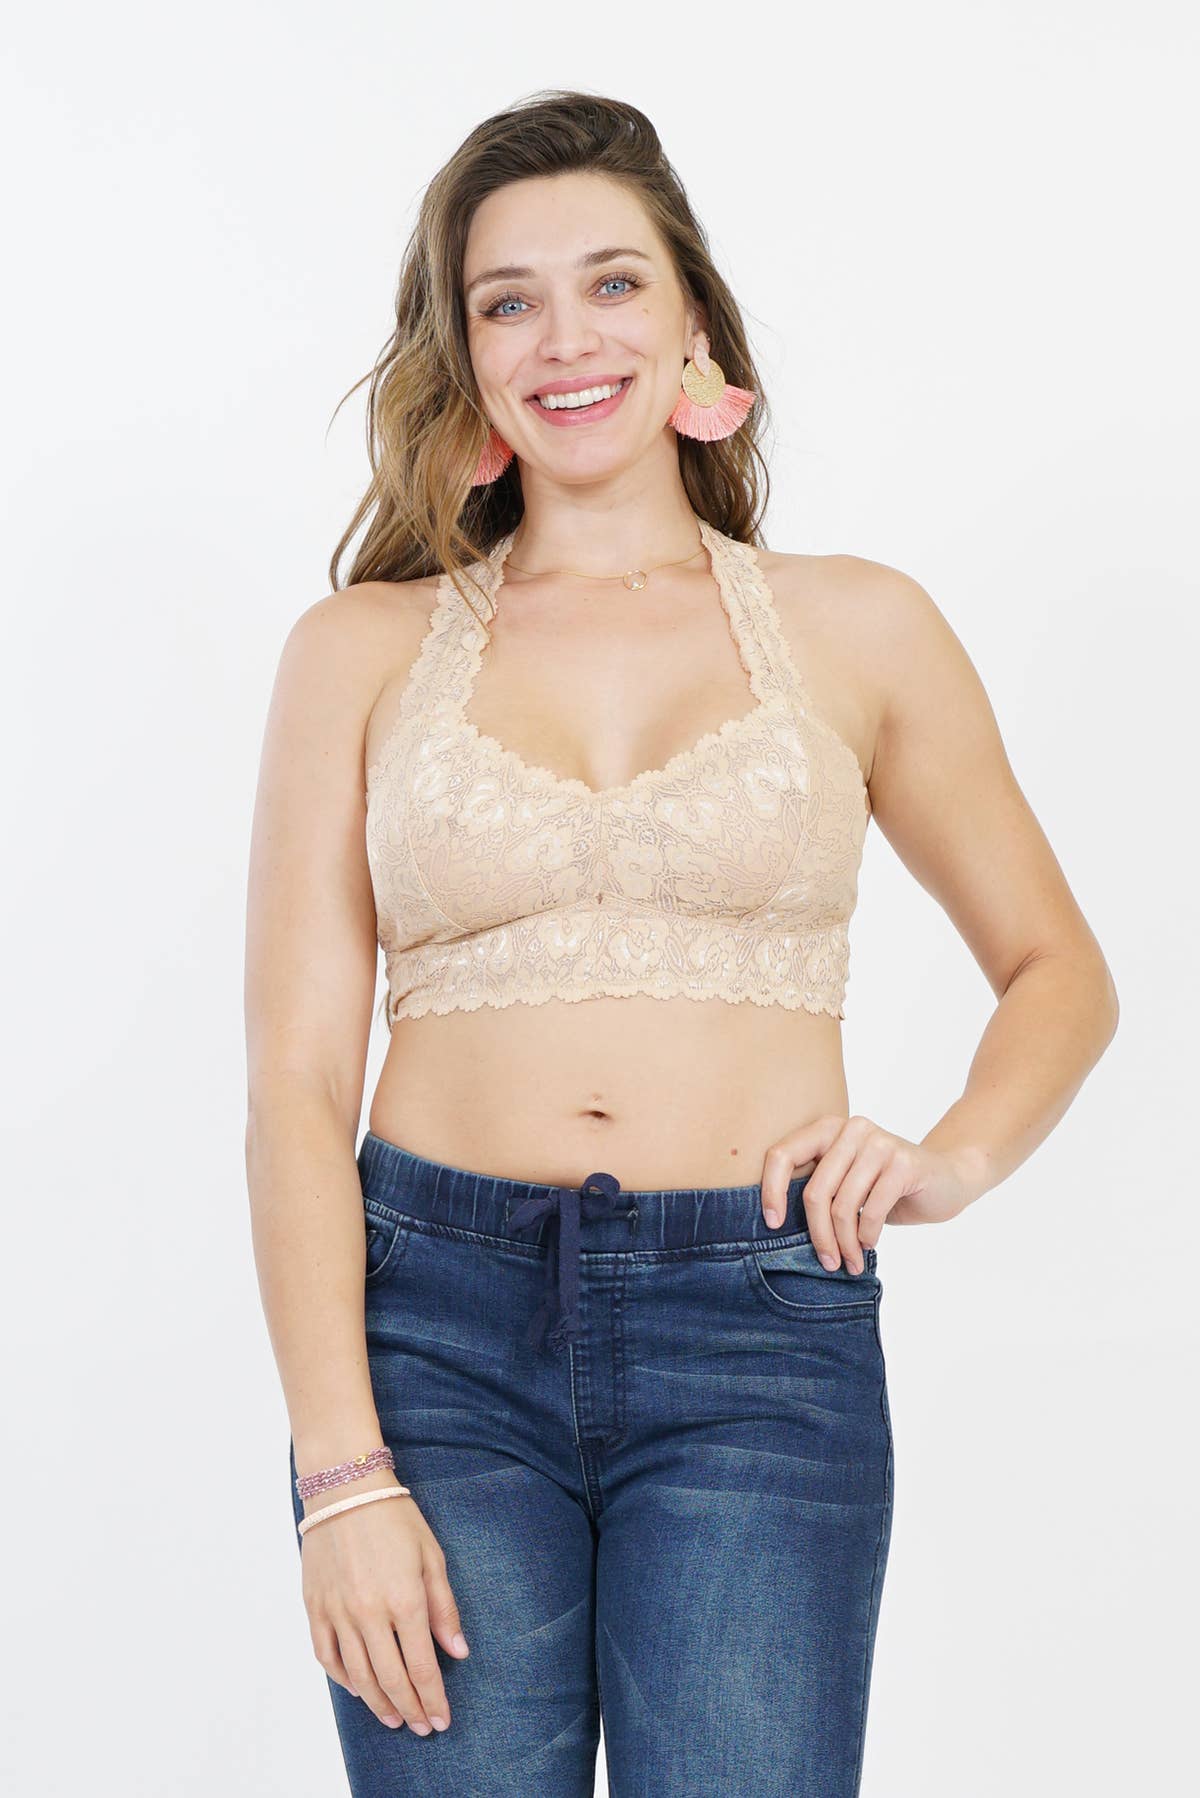 Beige Plus Stretch Lace Bralette Lined with Hourglass back - Passion of Essence Boutique